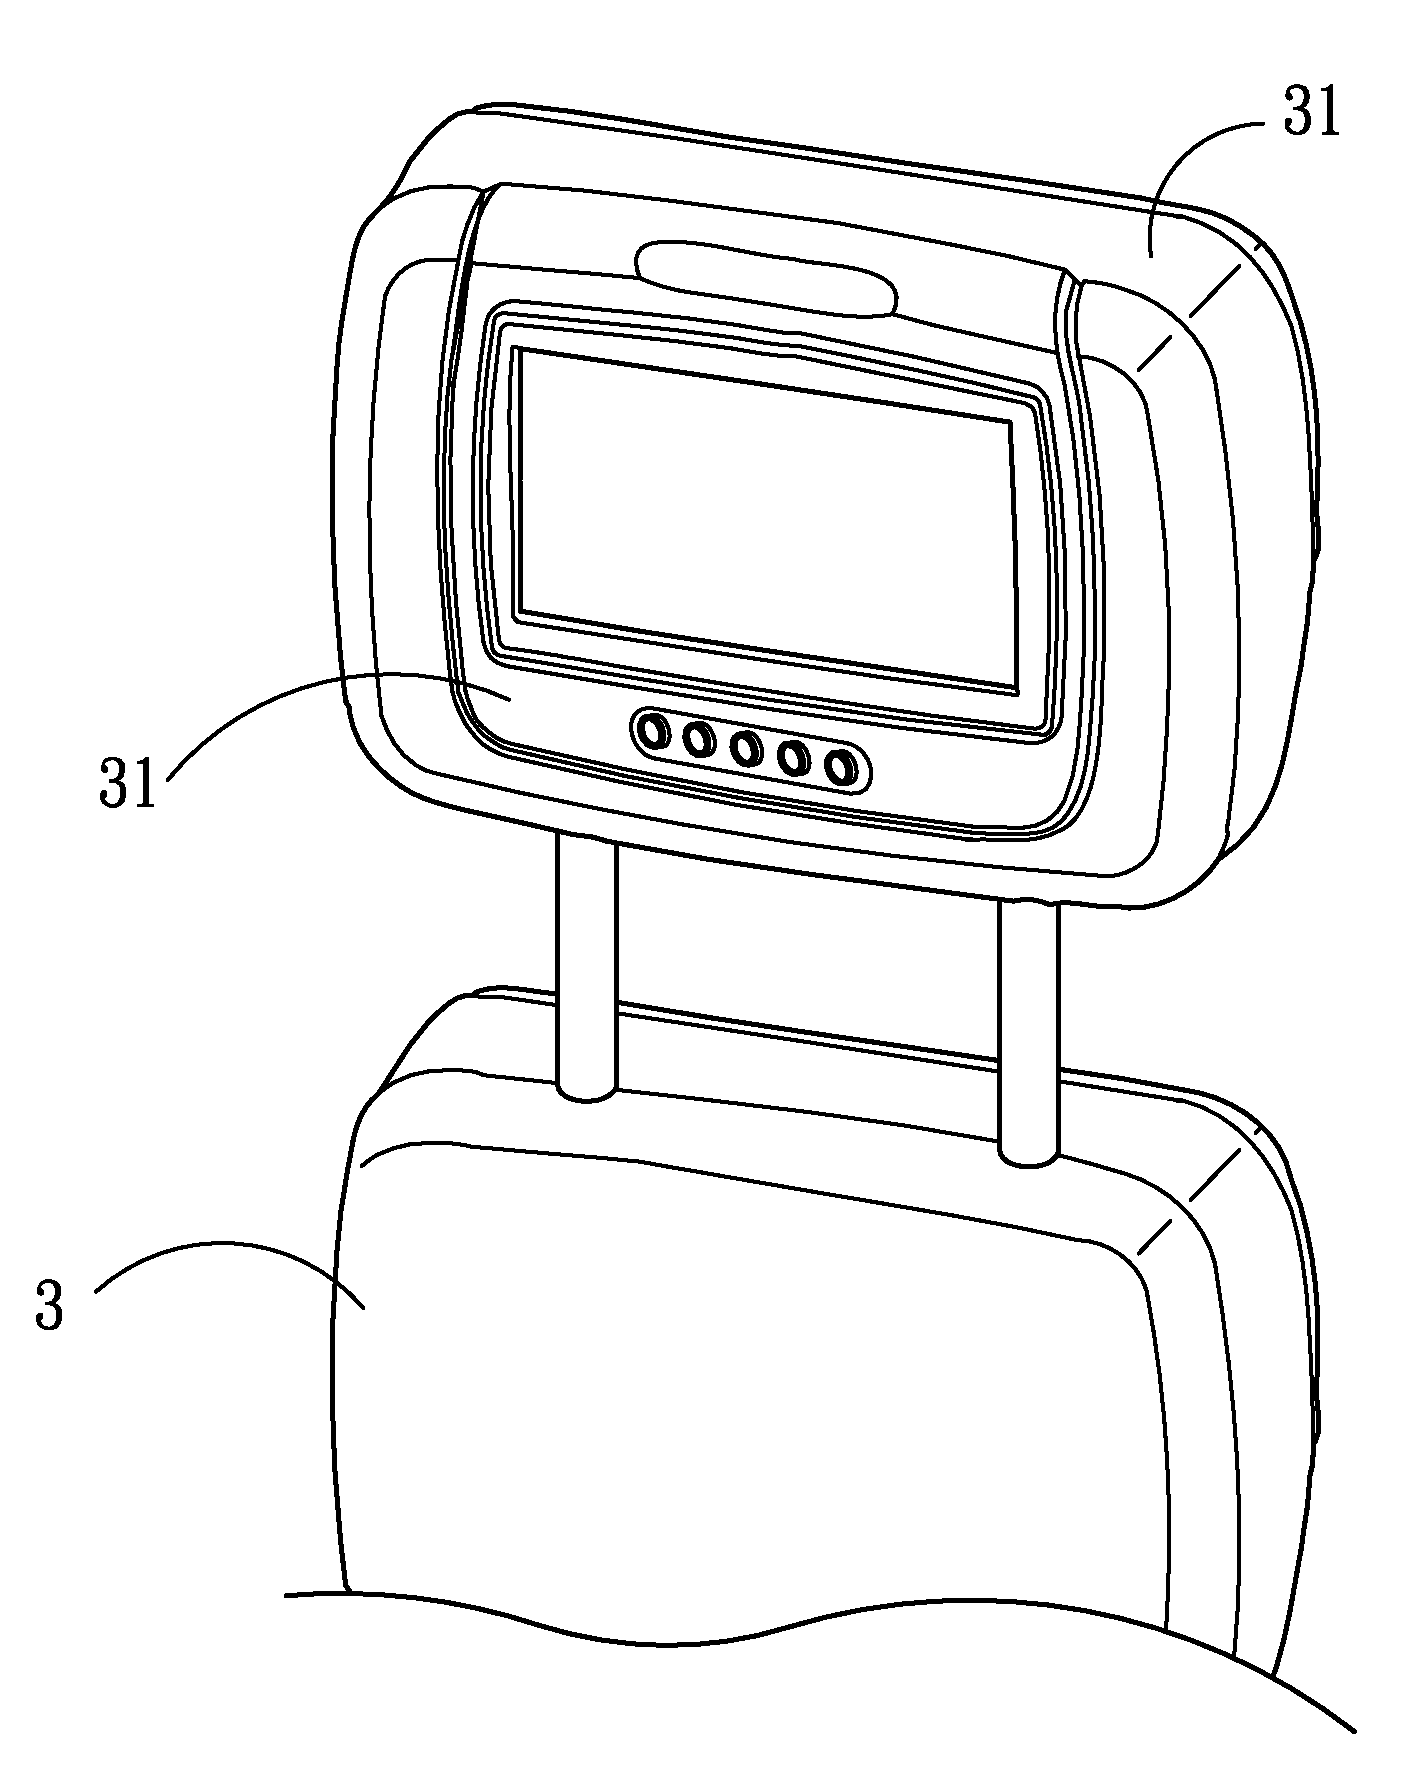 Reception Structure for Mobile Video and Audio Device